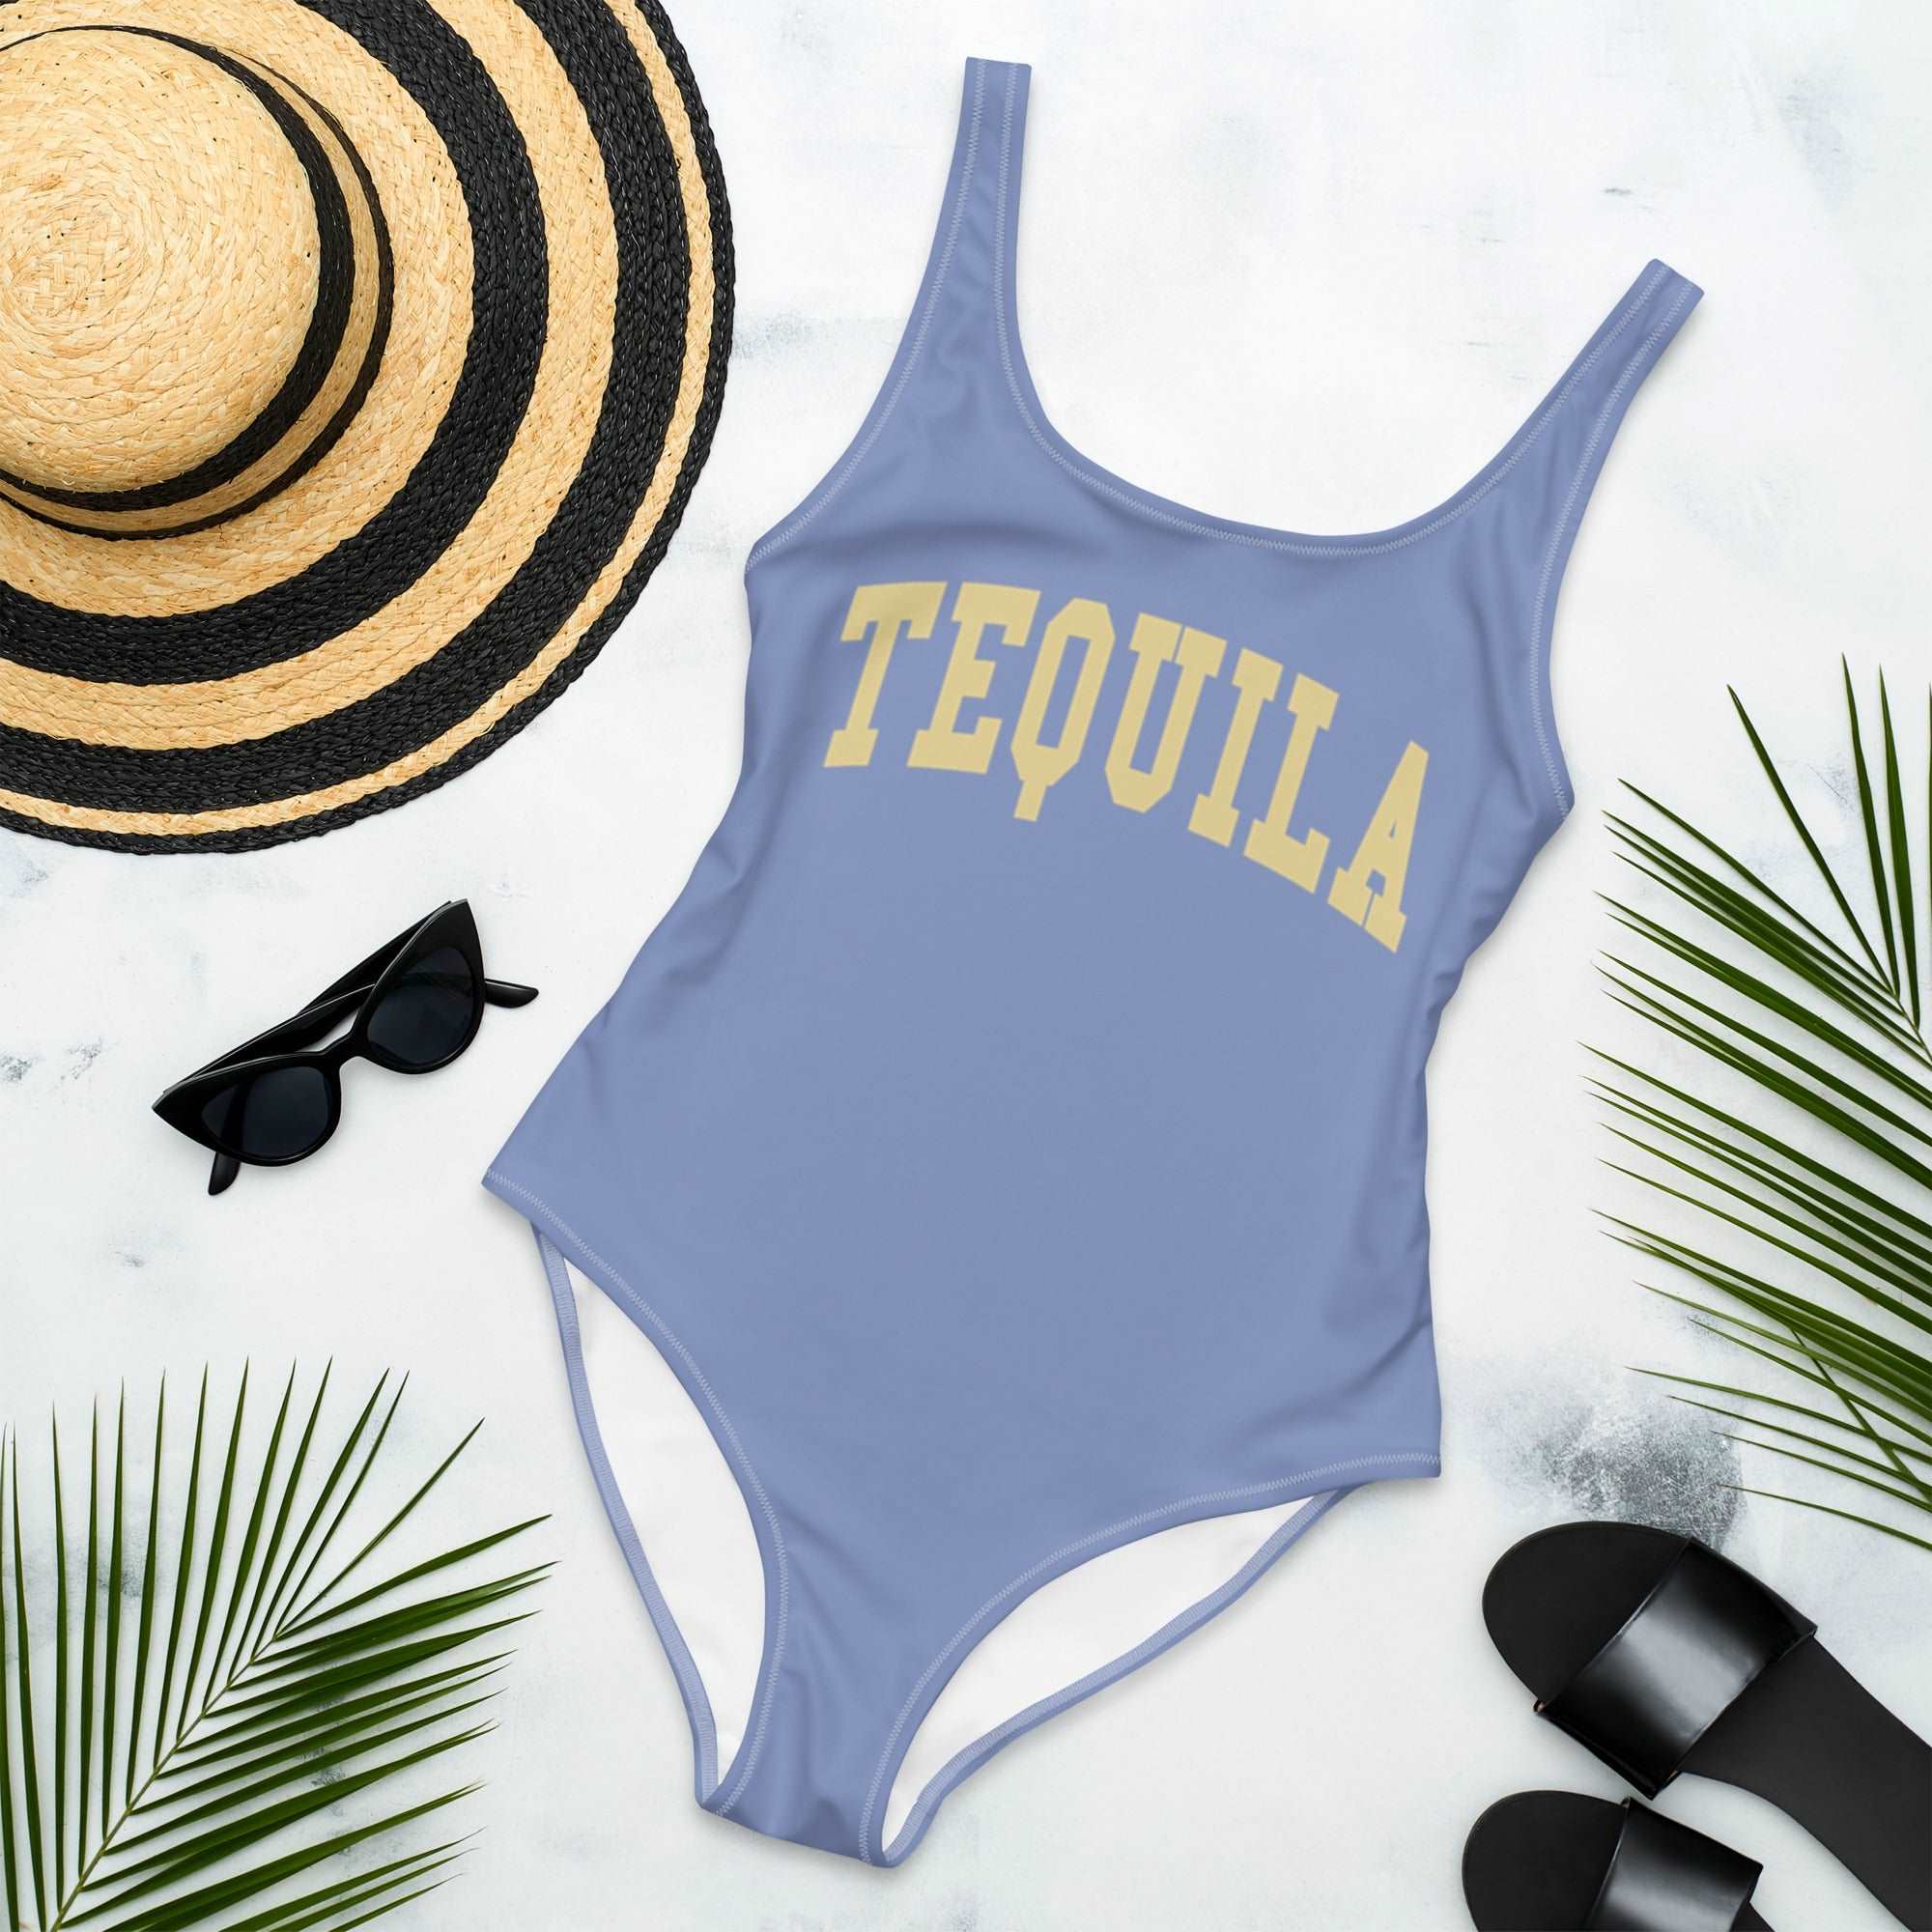 Tequila - Swimsuit - The Refined Spirit